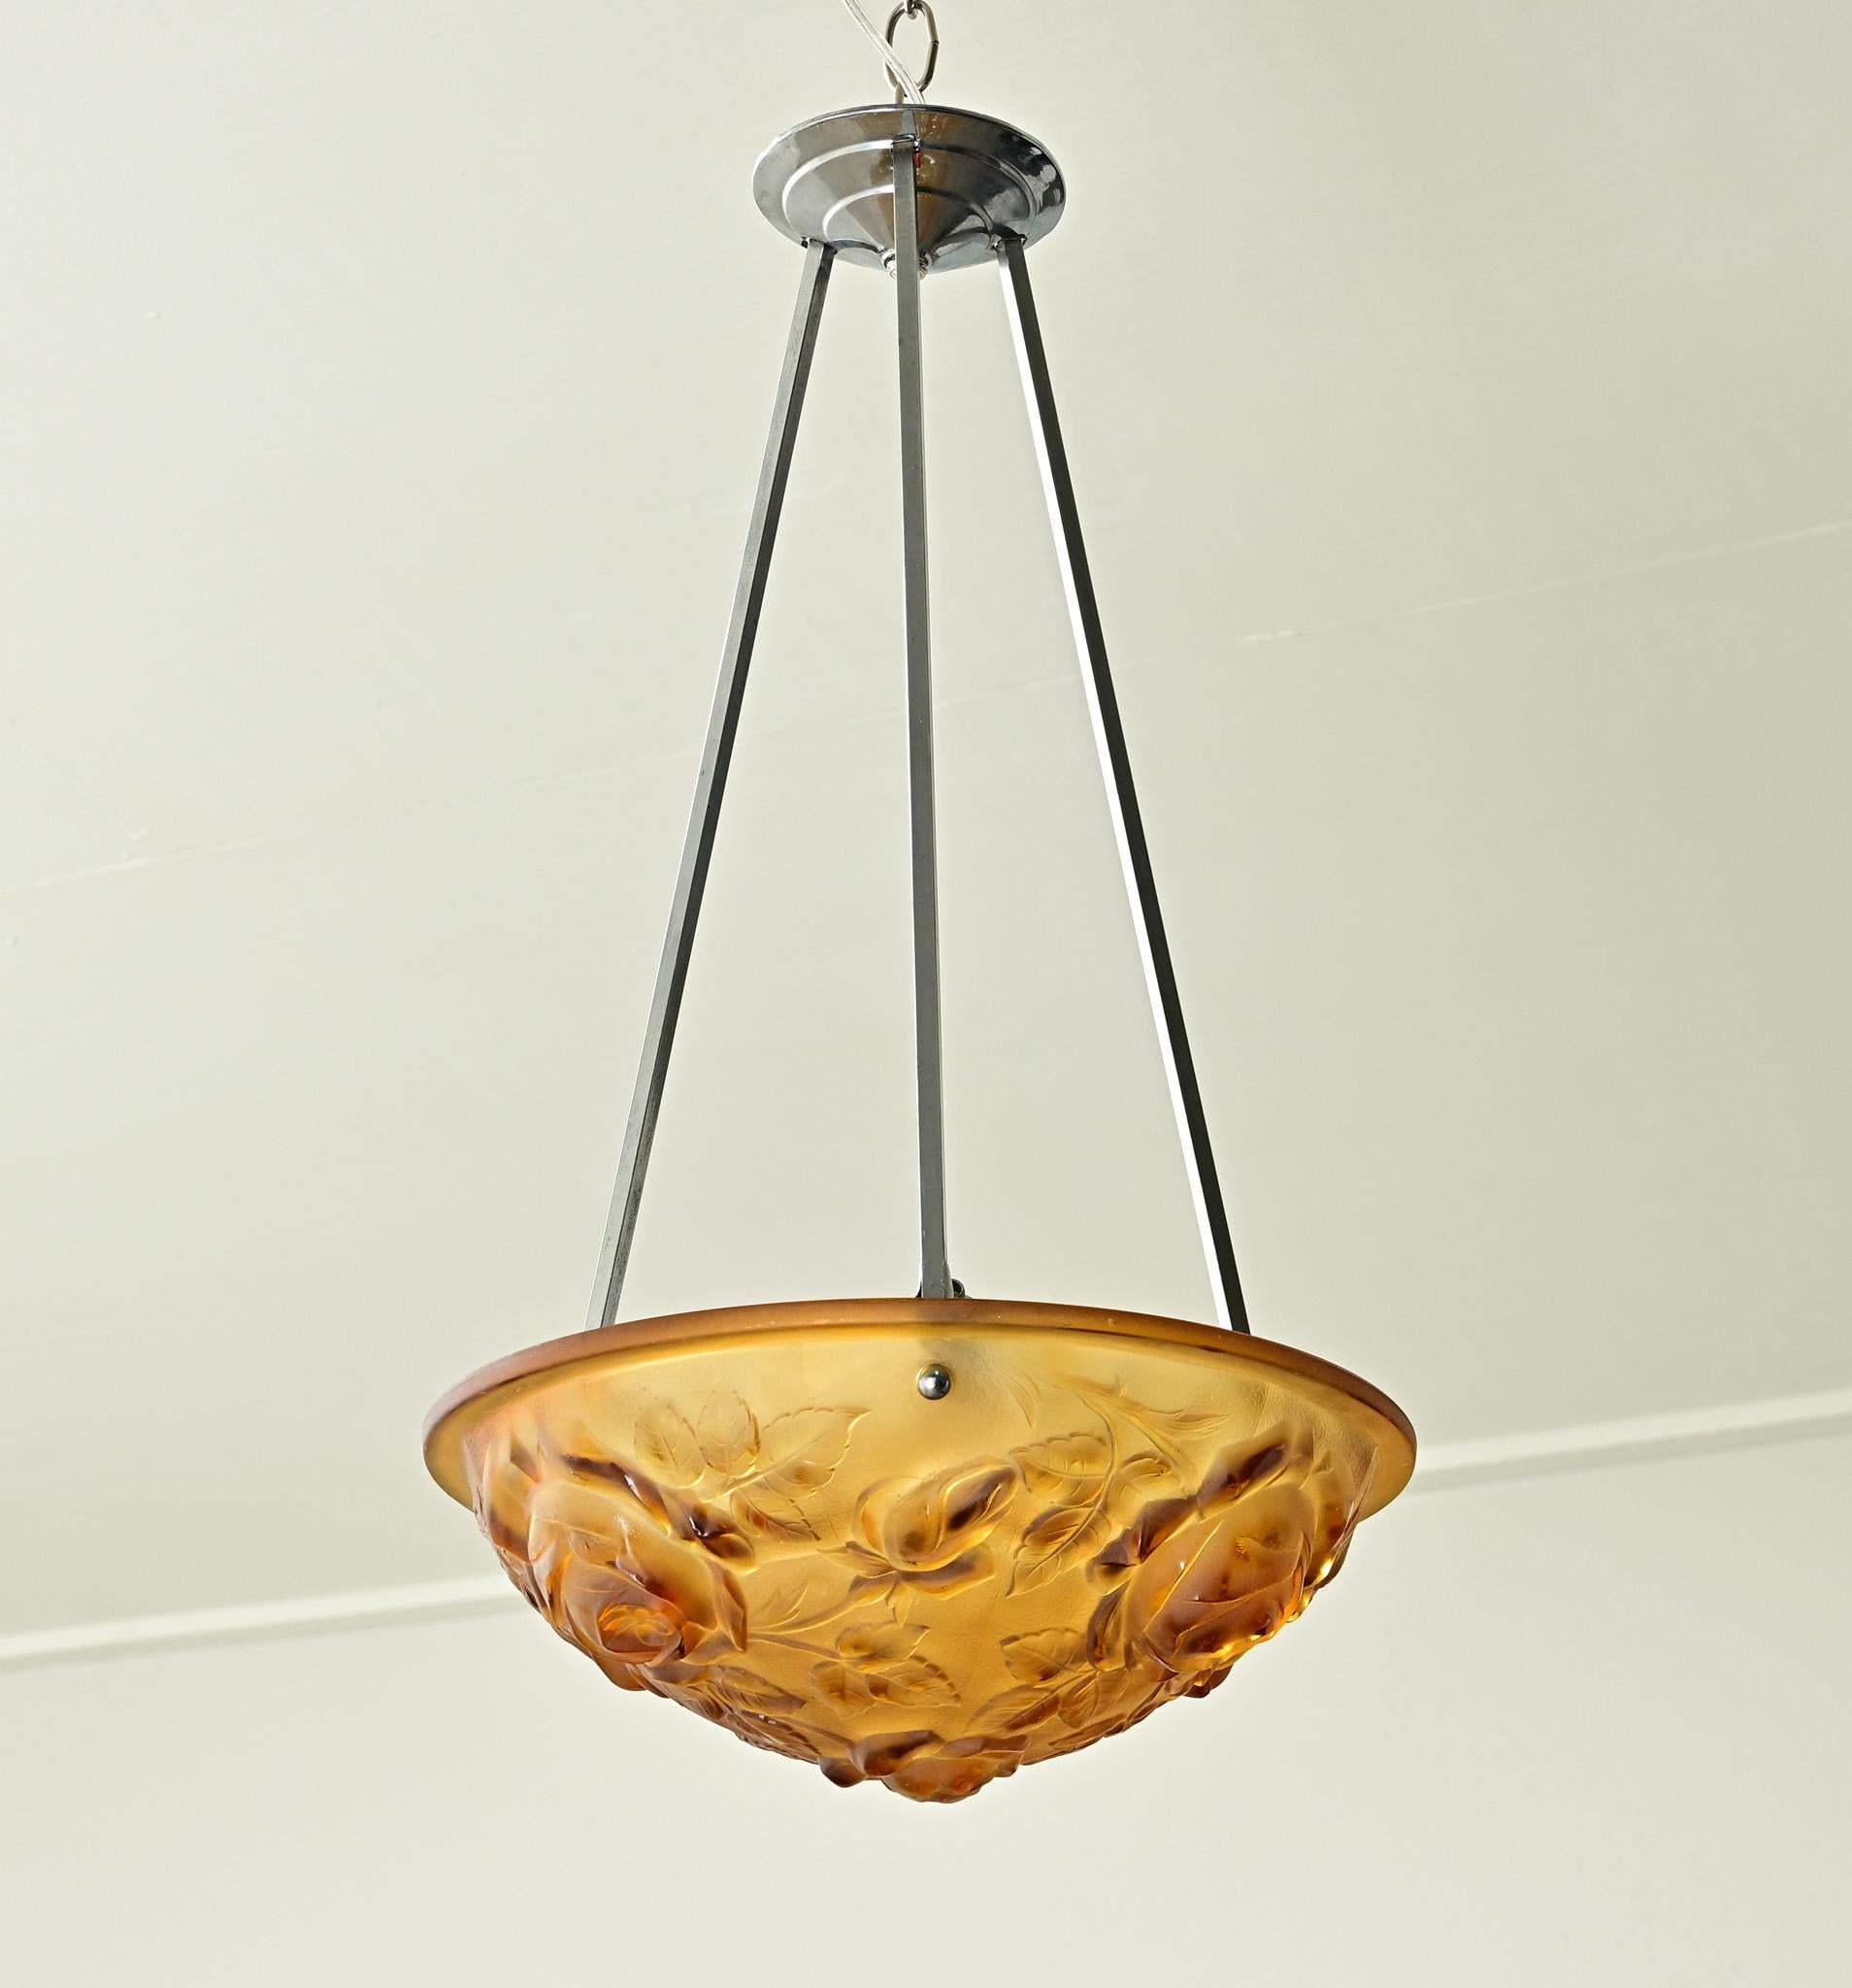 This French Art Deco pendant has an amber colored frosted glass with floral and foliate designs throughout. Recently wired for US electrical using UL listed parts and is ready to be hung in your interior. Be sure to view the detailed images to see